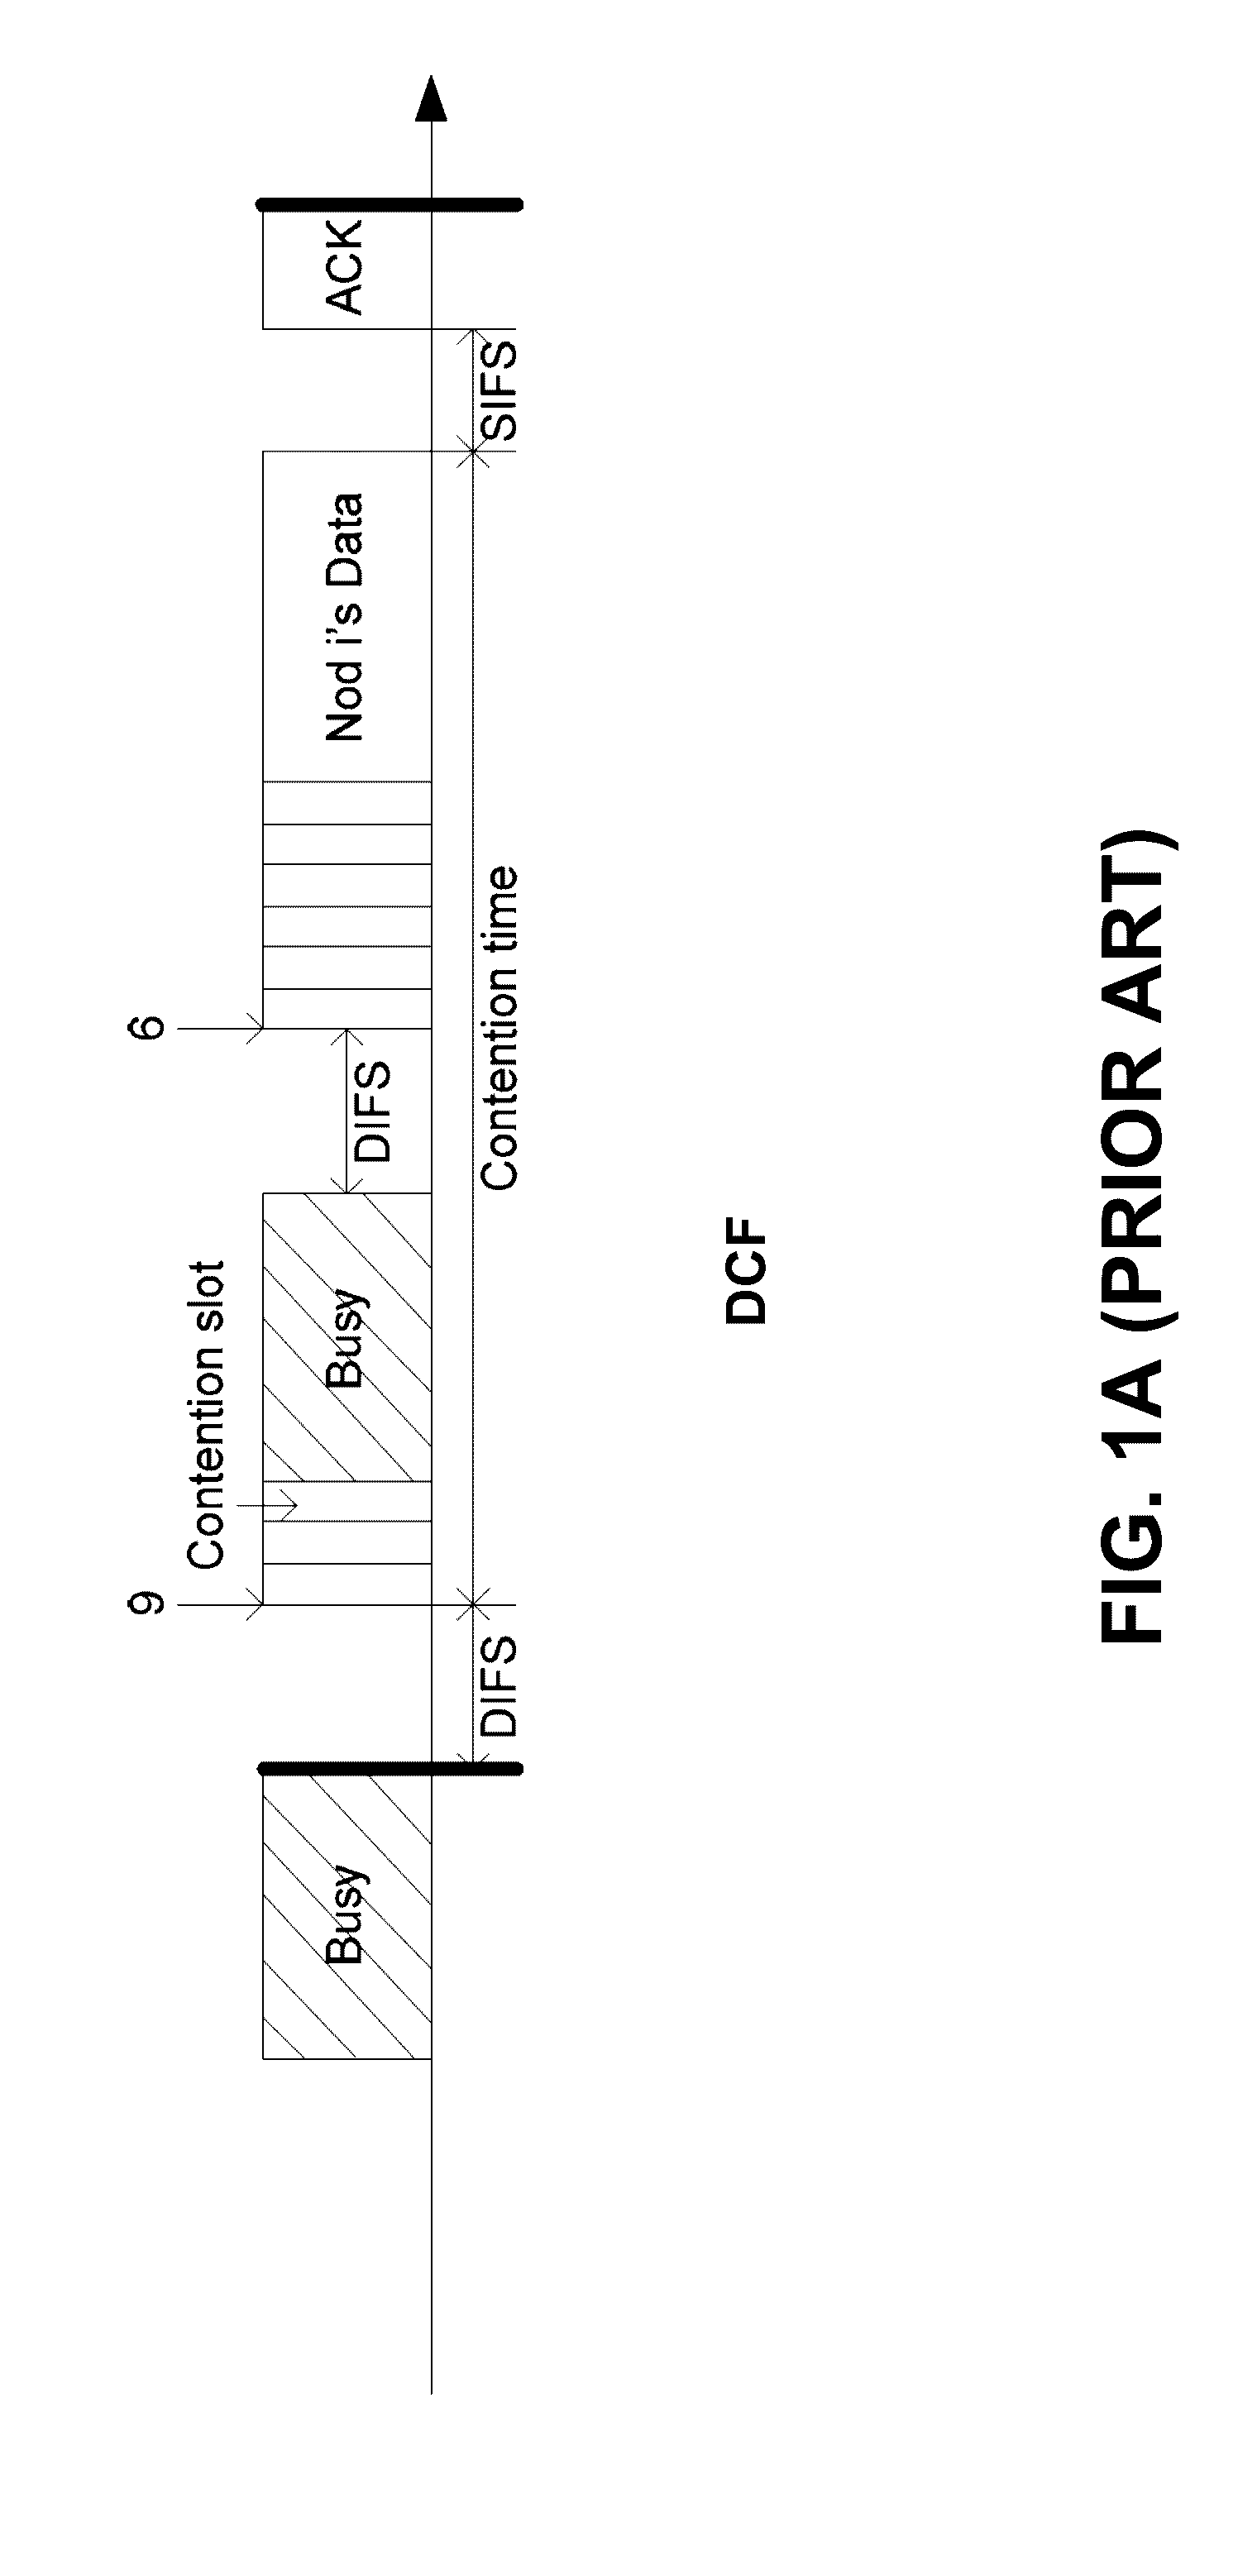 System Parameter Optimization for Delayed Channel Access Protocol